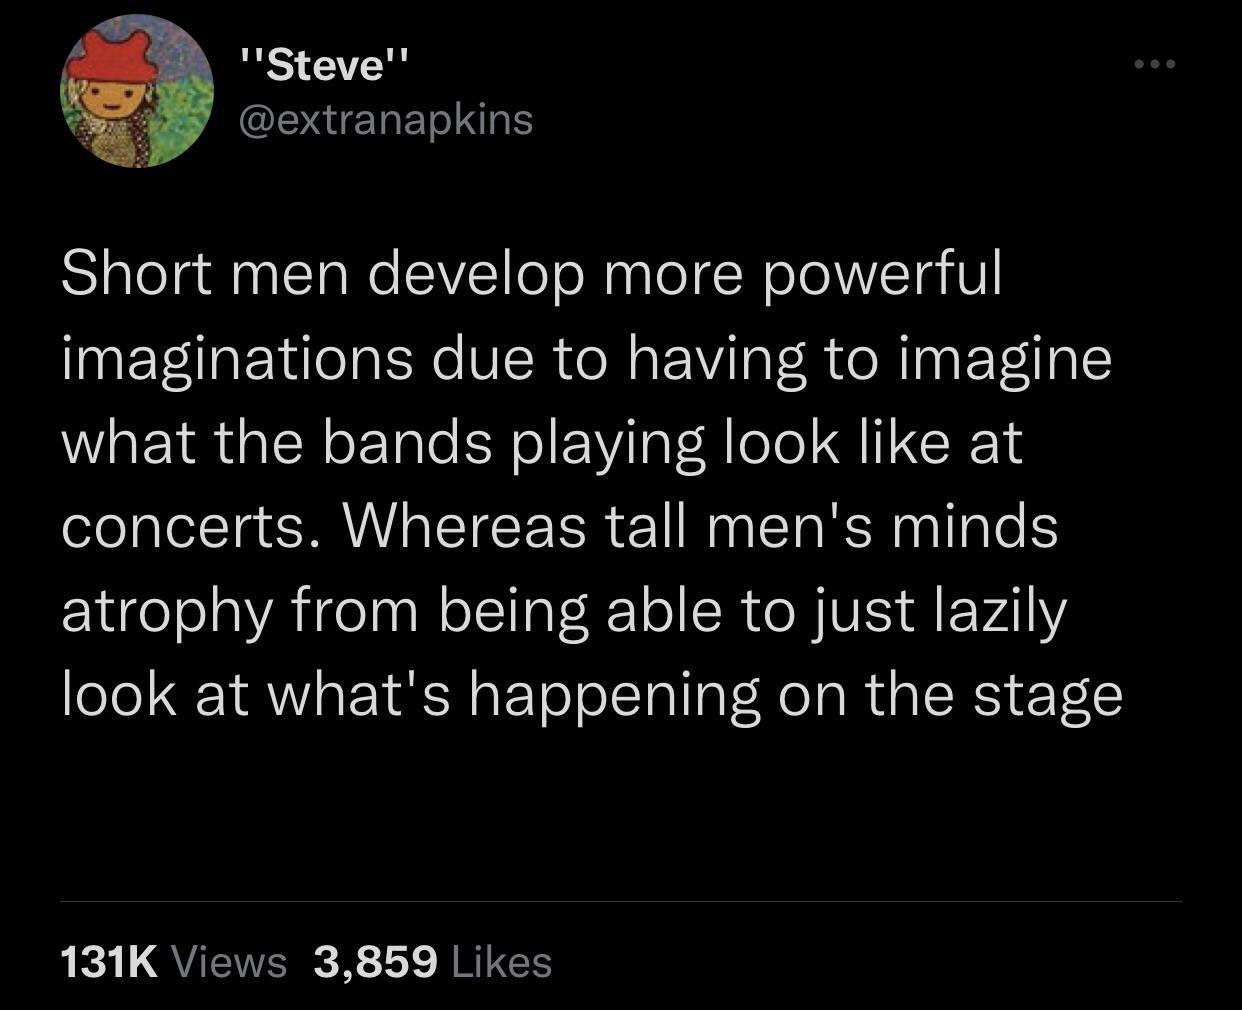 dank memes - boy gave a girl 13 - "Steve" Short men develop more powerful imaginations due to having to imagine what the bands playing look at concerts. Whereas tall men's minds atrophy from being able to just lazily look at what's happening on the stage 